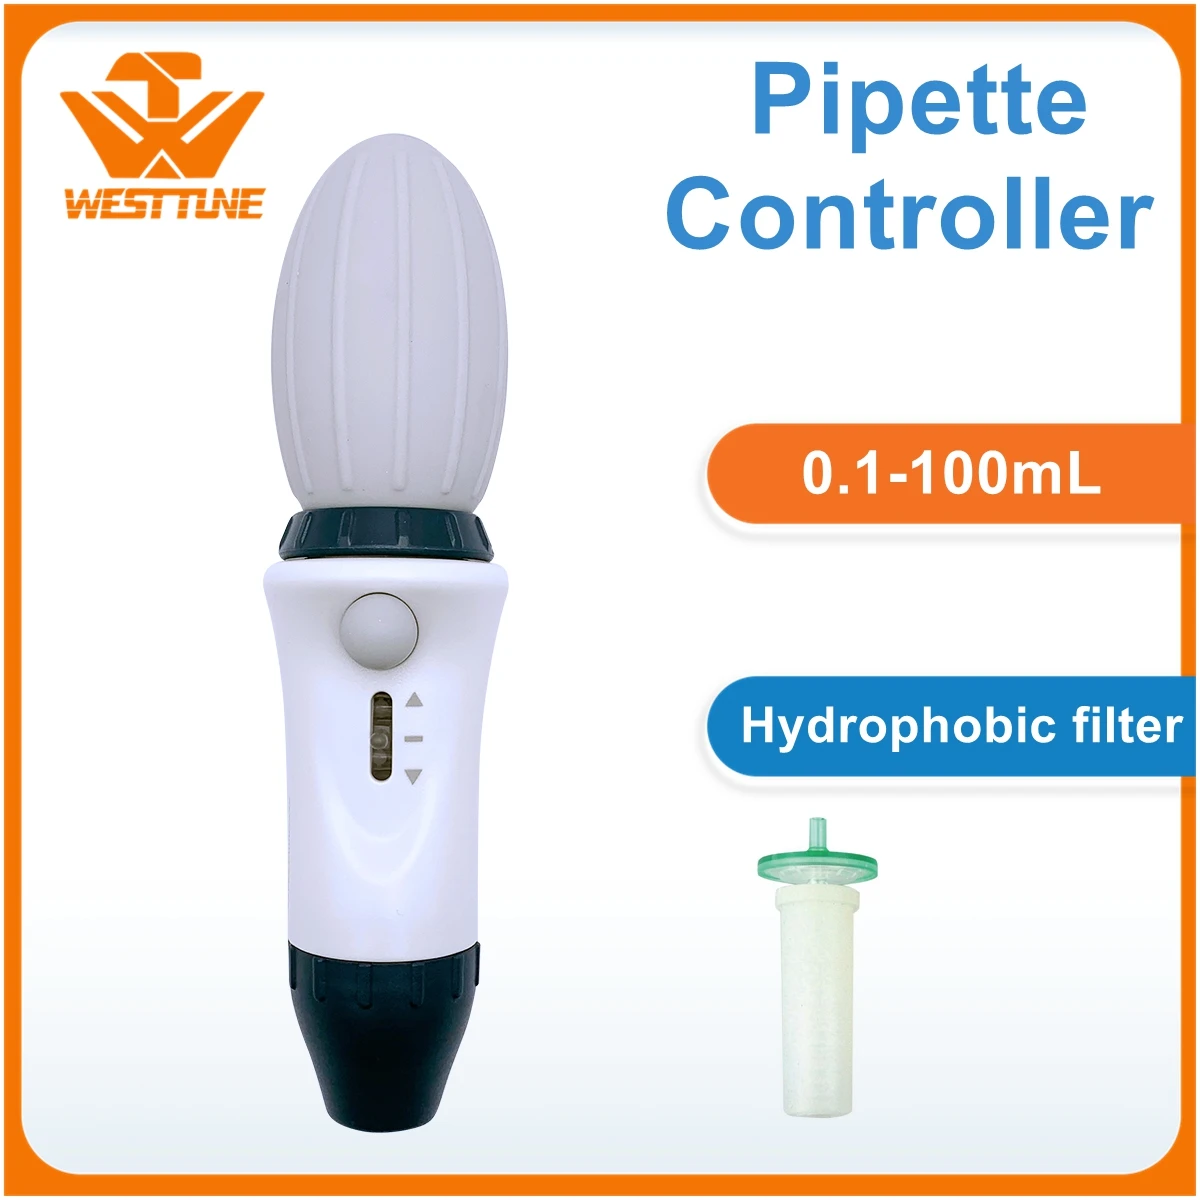 

Large Volume LEVO Pipette Controller 0.1-100ml Glass Plastic Graduated Pasture Pipettes Transfer Pump Manul Pipettor with Filter